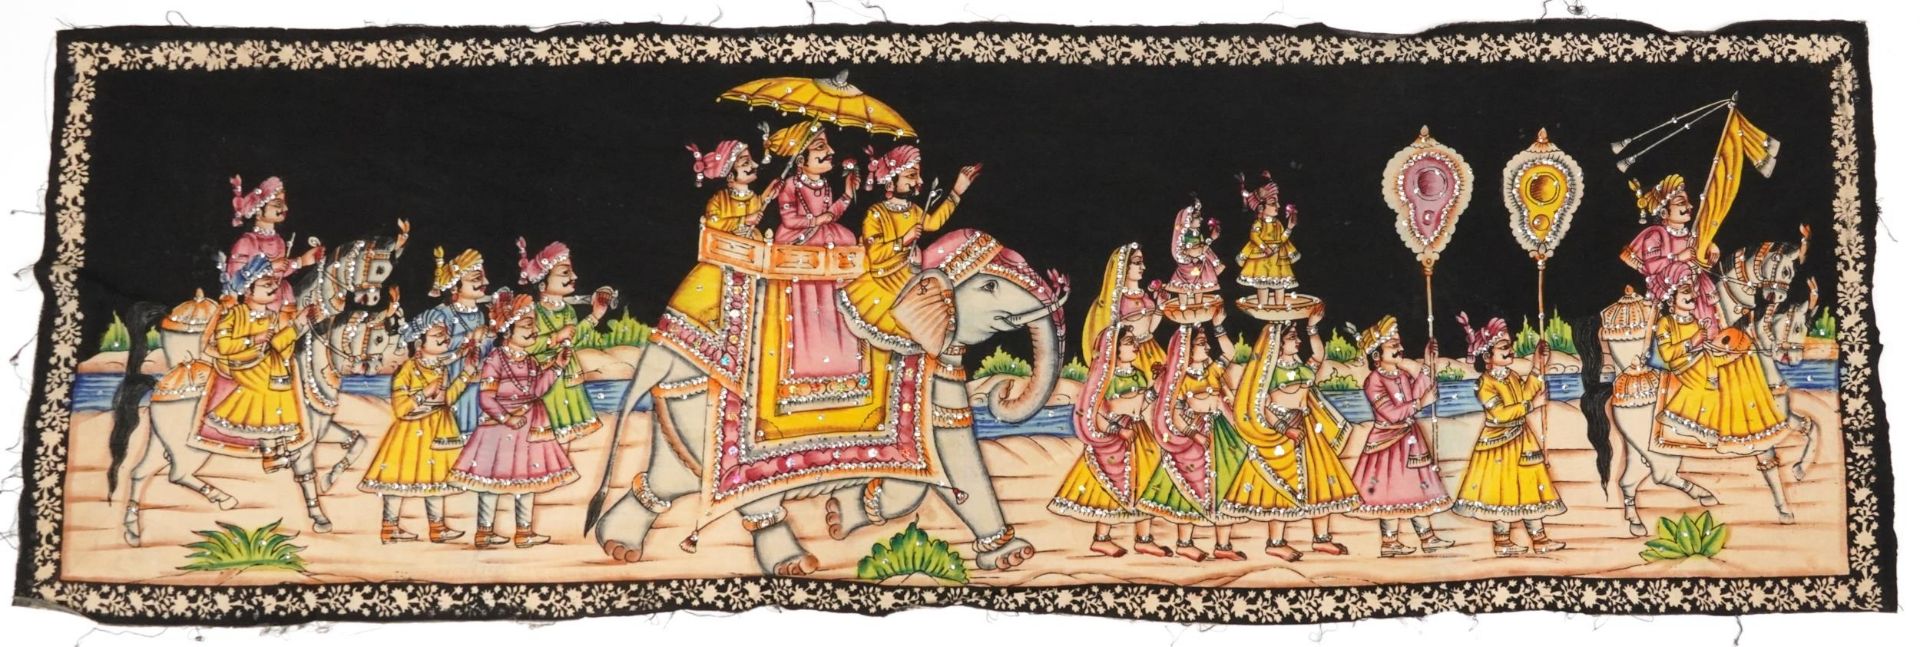 Indian sequinned textile depicting a mahout procession, 145cm x 54cm : For further information on